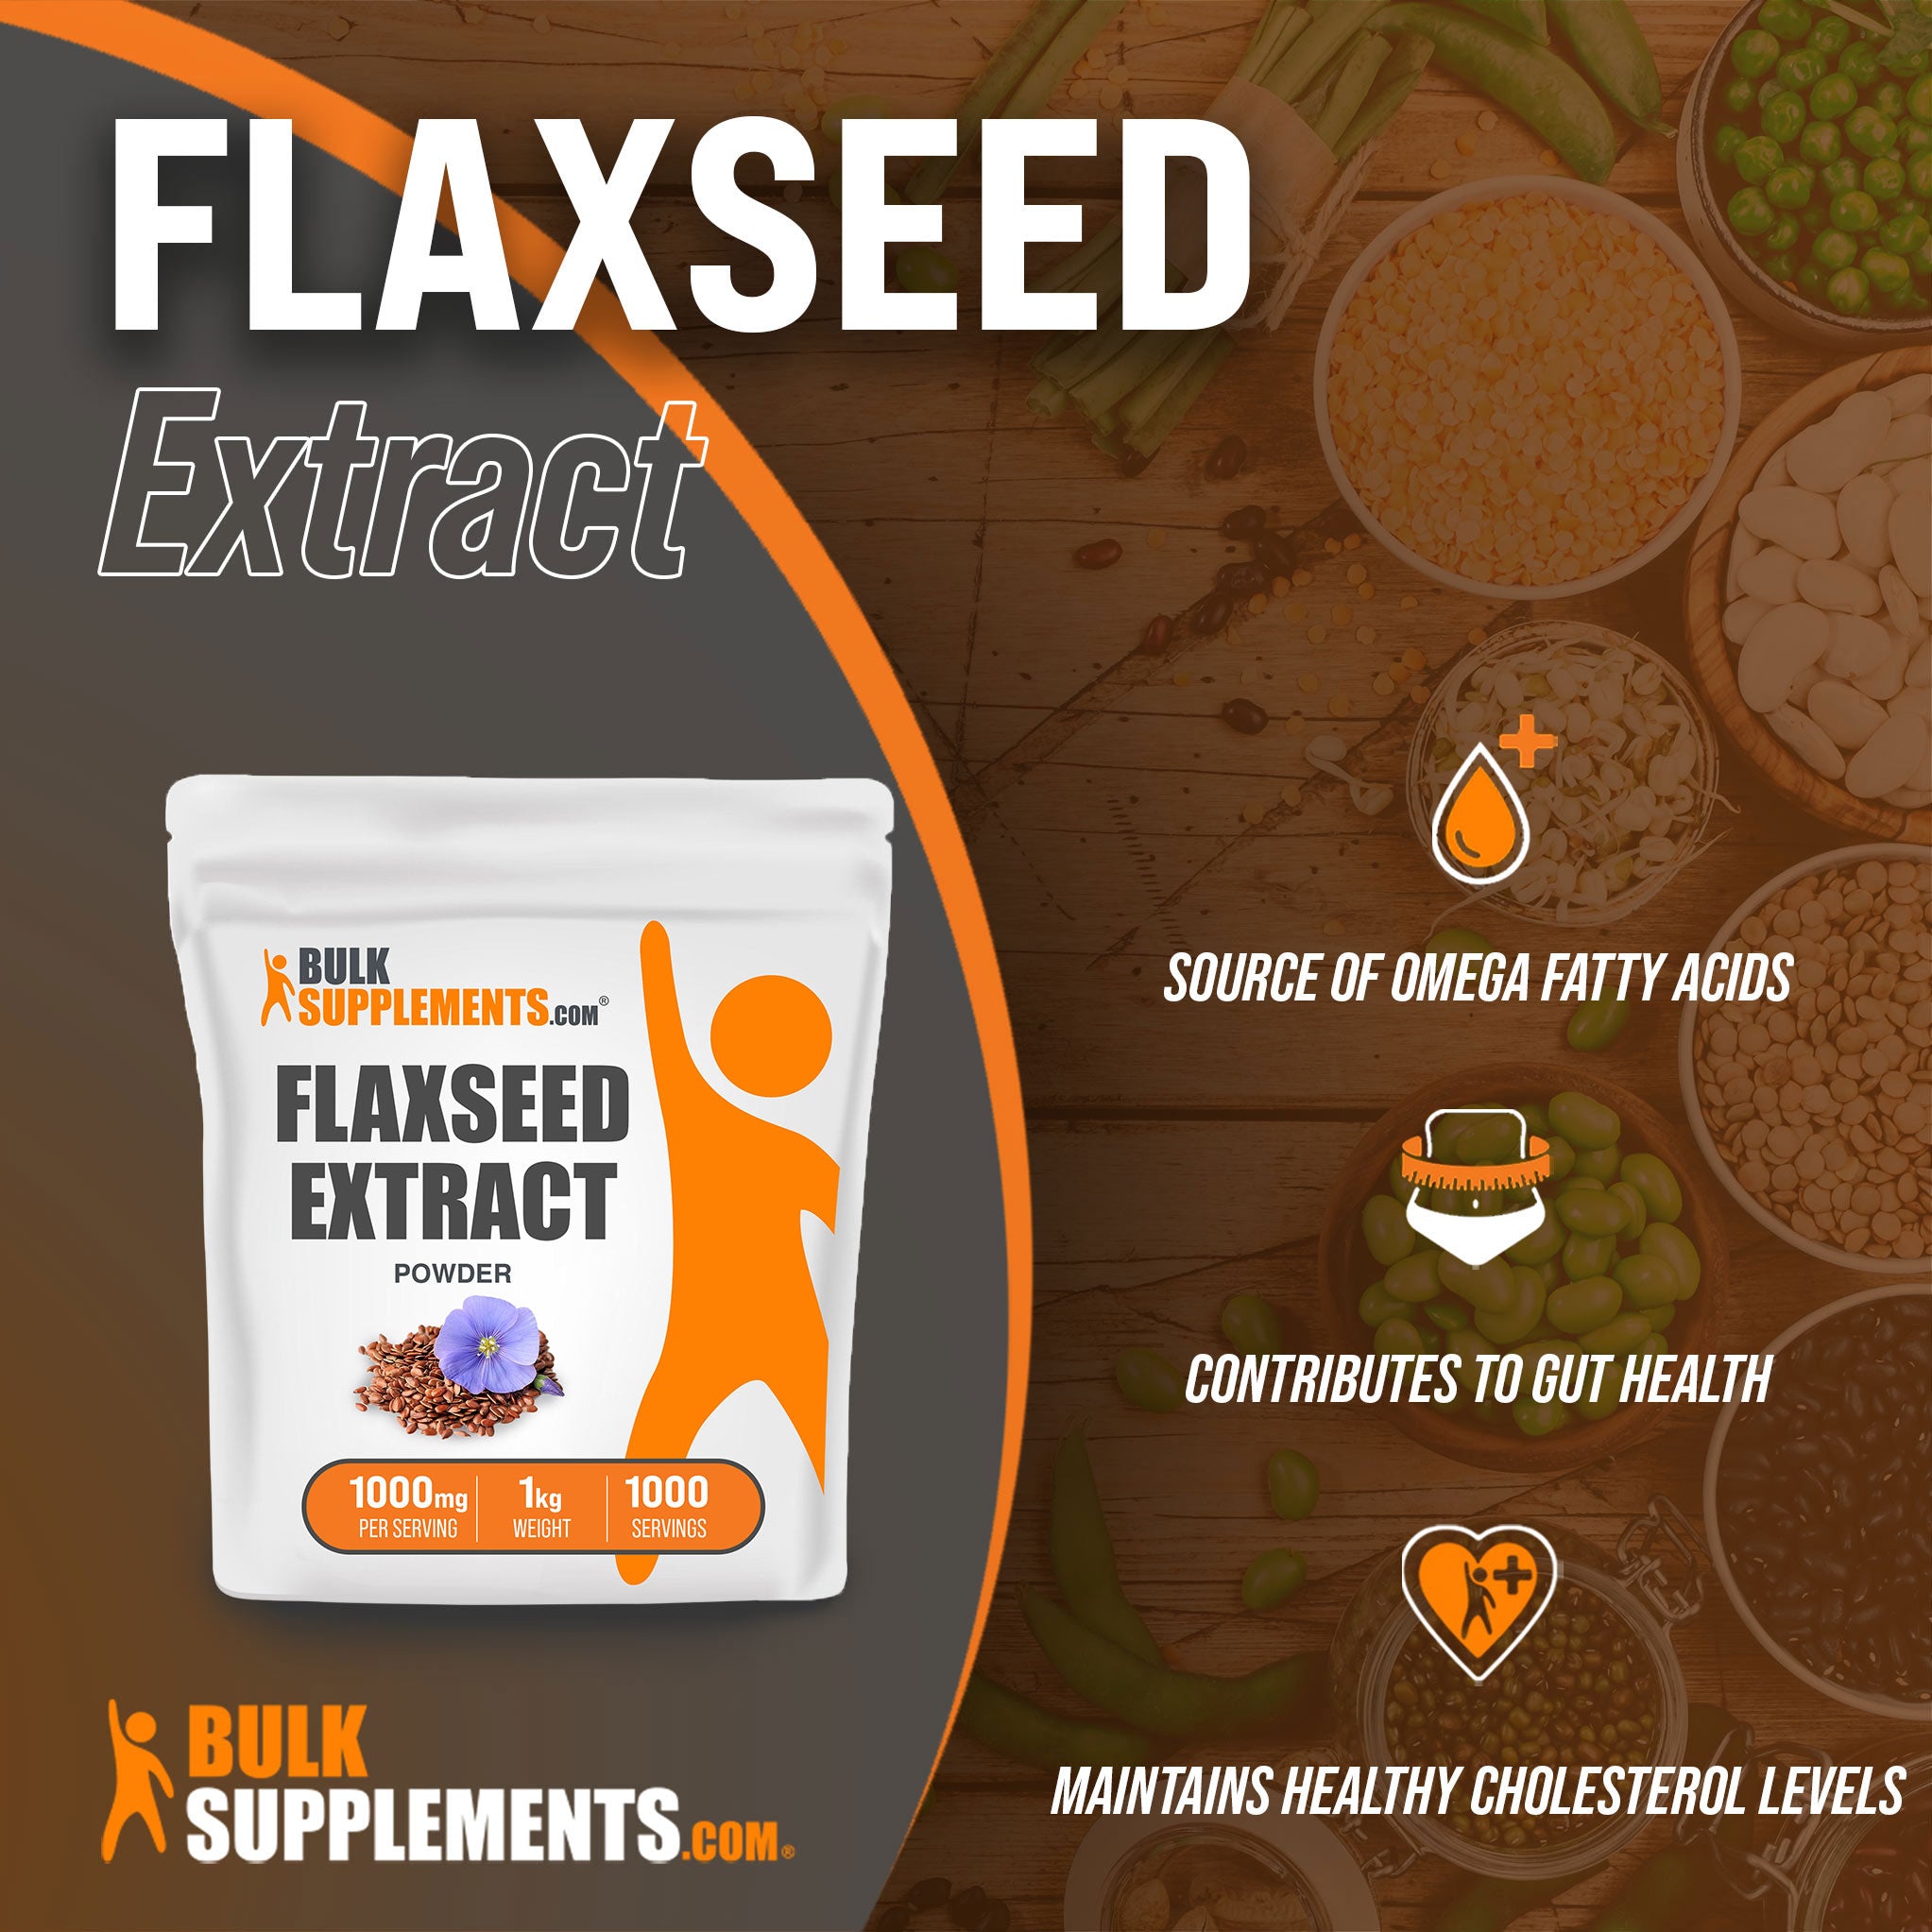 Benefits of Flaxseed Extract; source of omega fatty acids, contributes to gut health, maintains healthy cholesterol levels